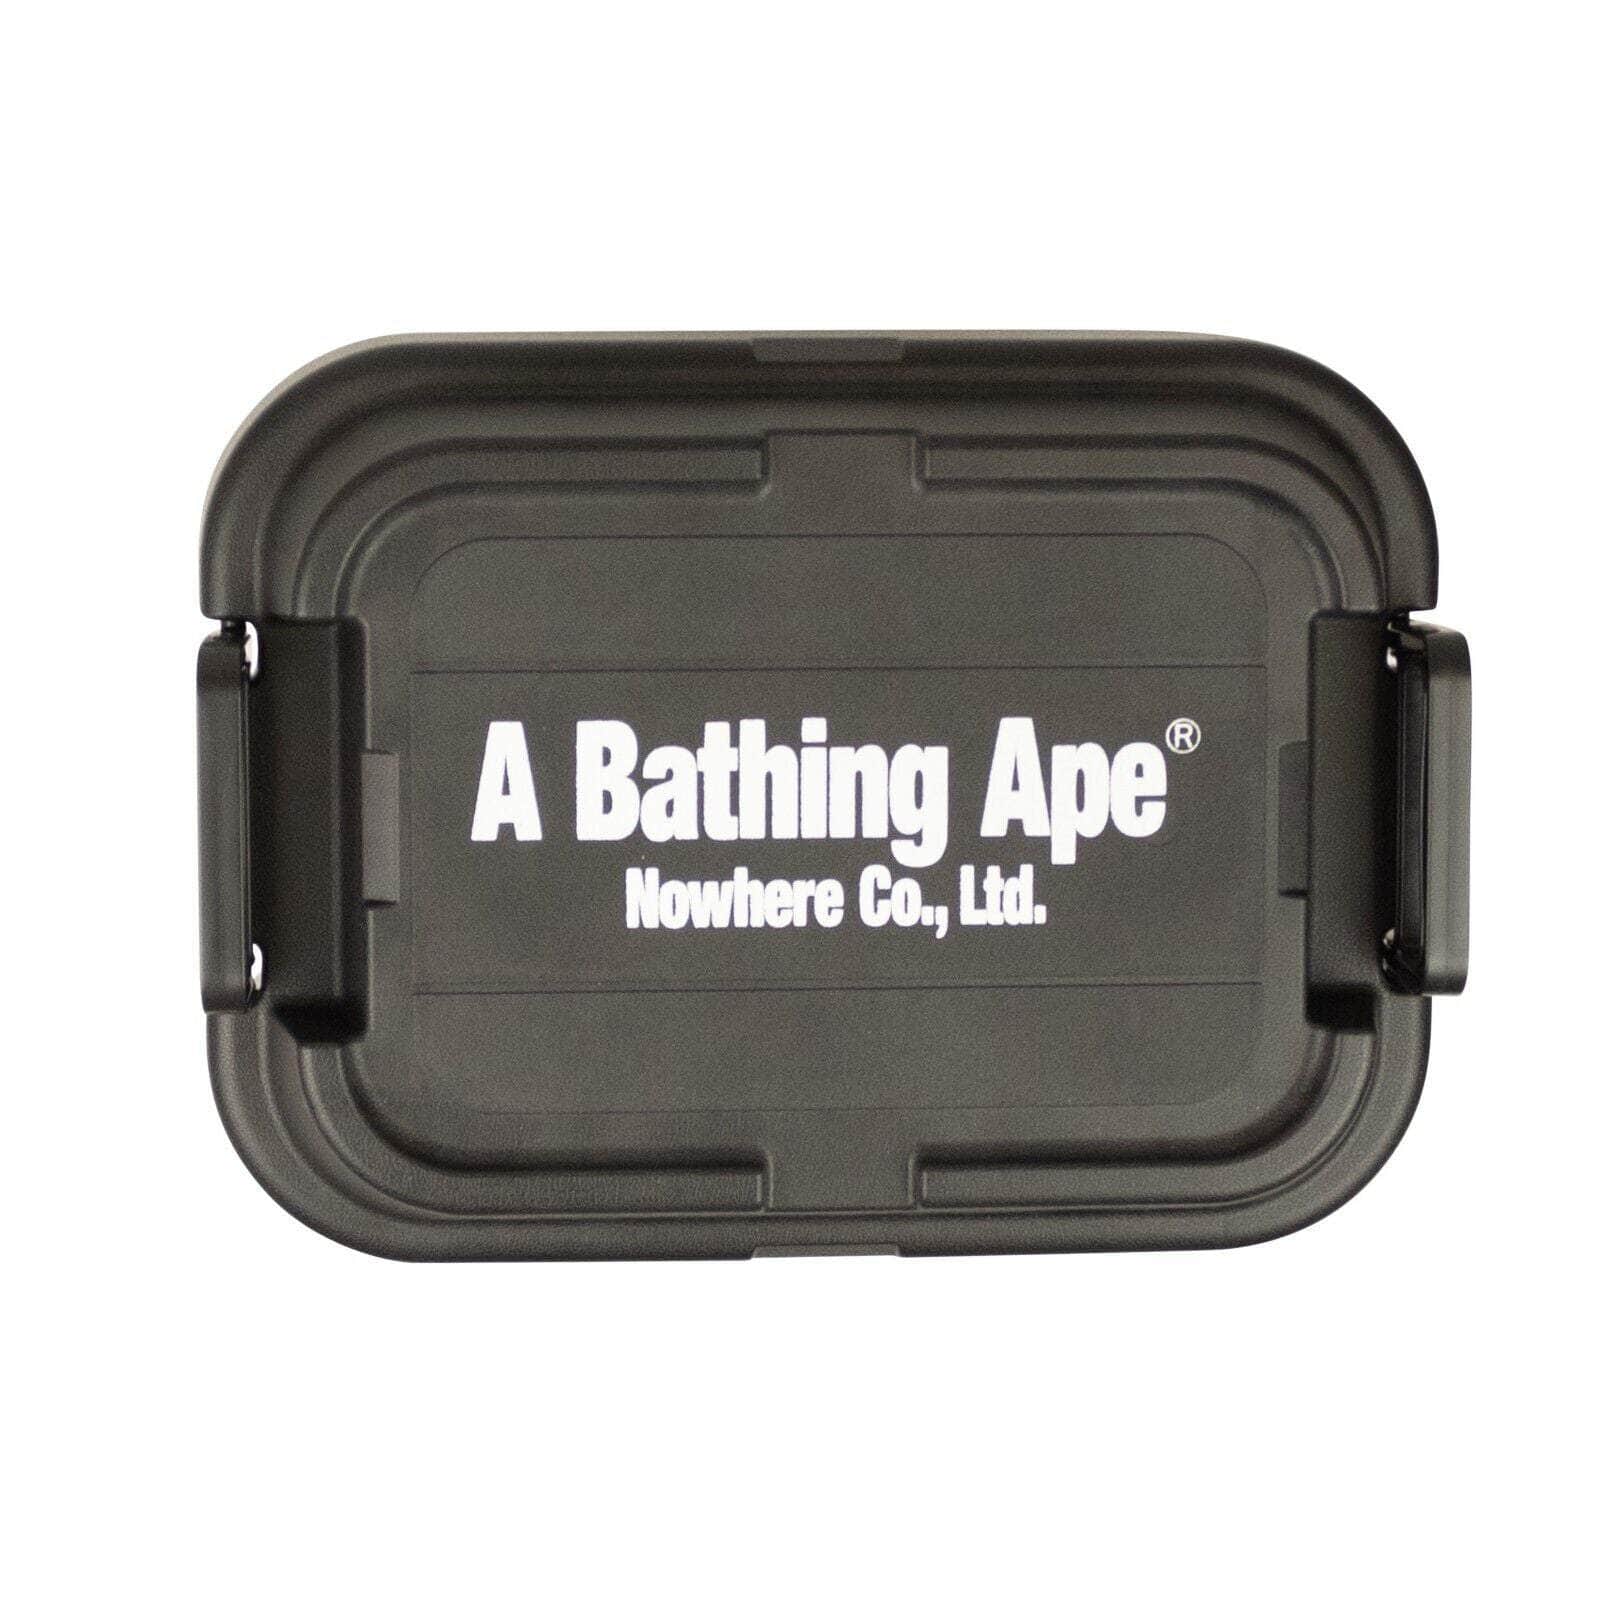 Bape bape, channelenable-all, chicmi, couponcollection, gender-mens, gender-womens, kitchen-decor, main-accessories, mens-shoes, shop375, size-os, under-250 OS Black Mini Logo Storage Box BAP-XACC-0042/OS BAP-XACC-0042/OS